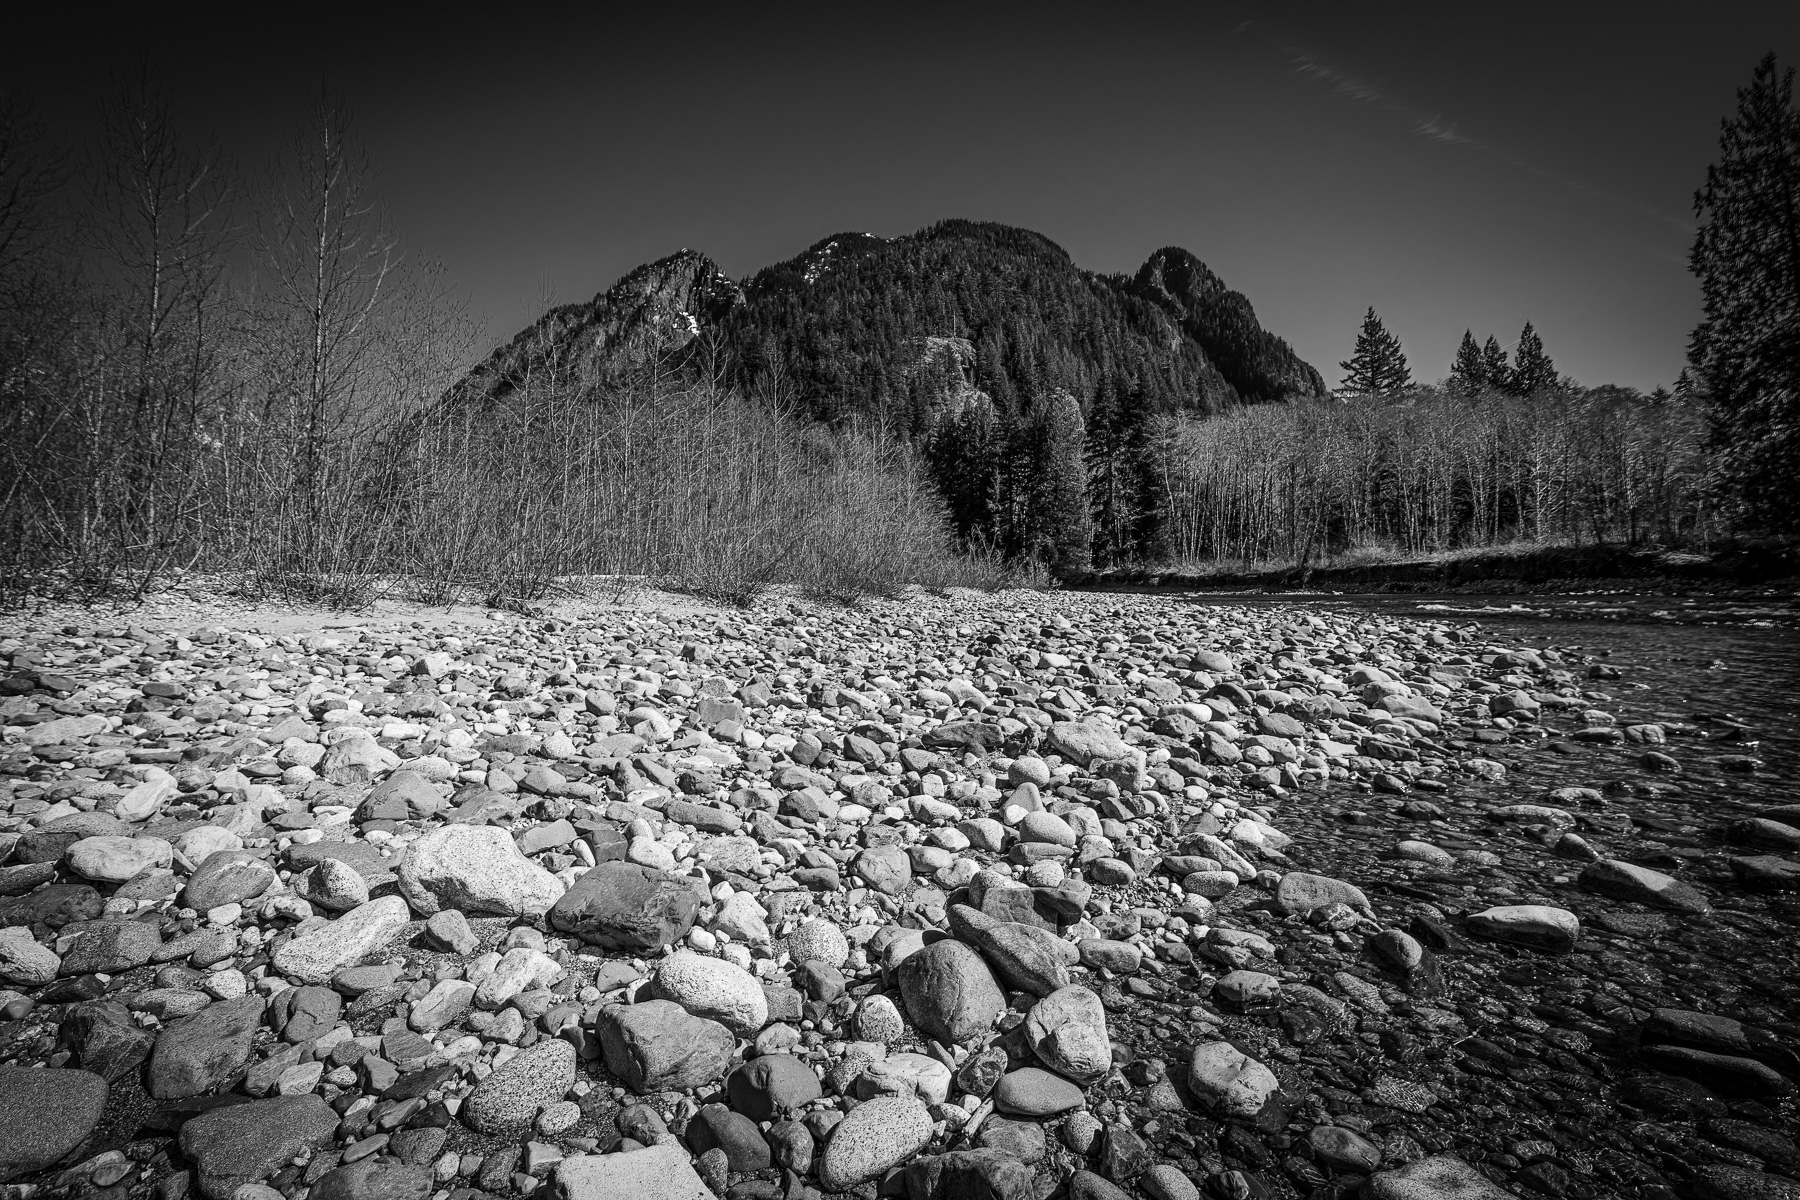 Middle Fork Monochrome